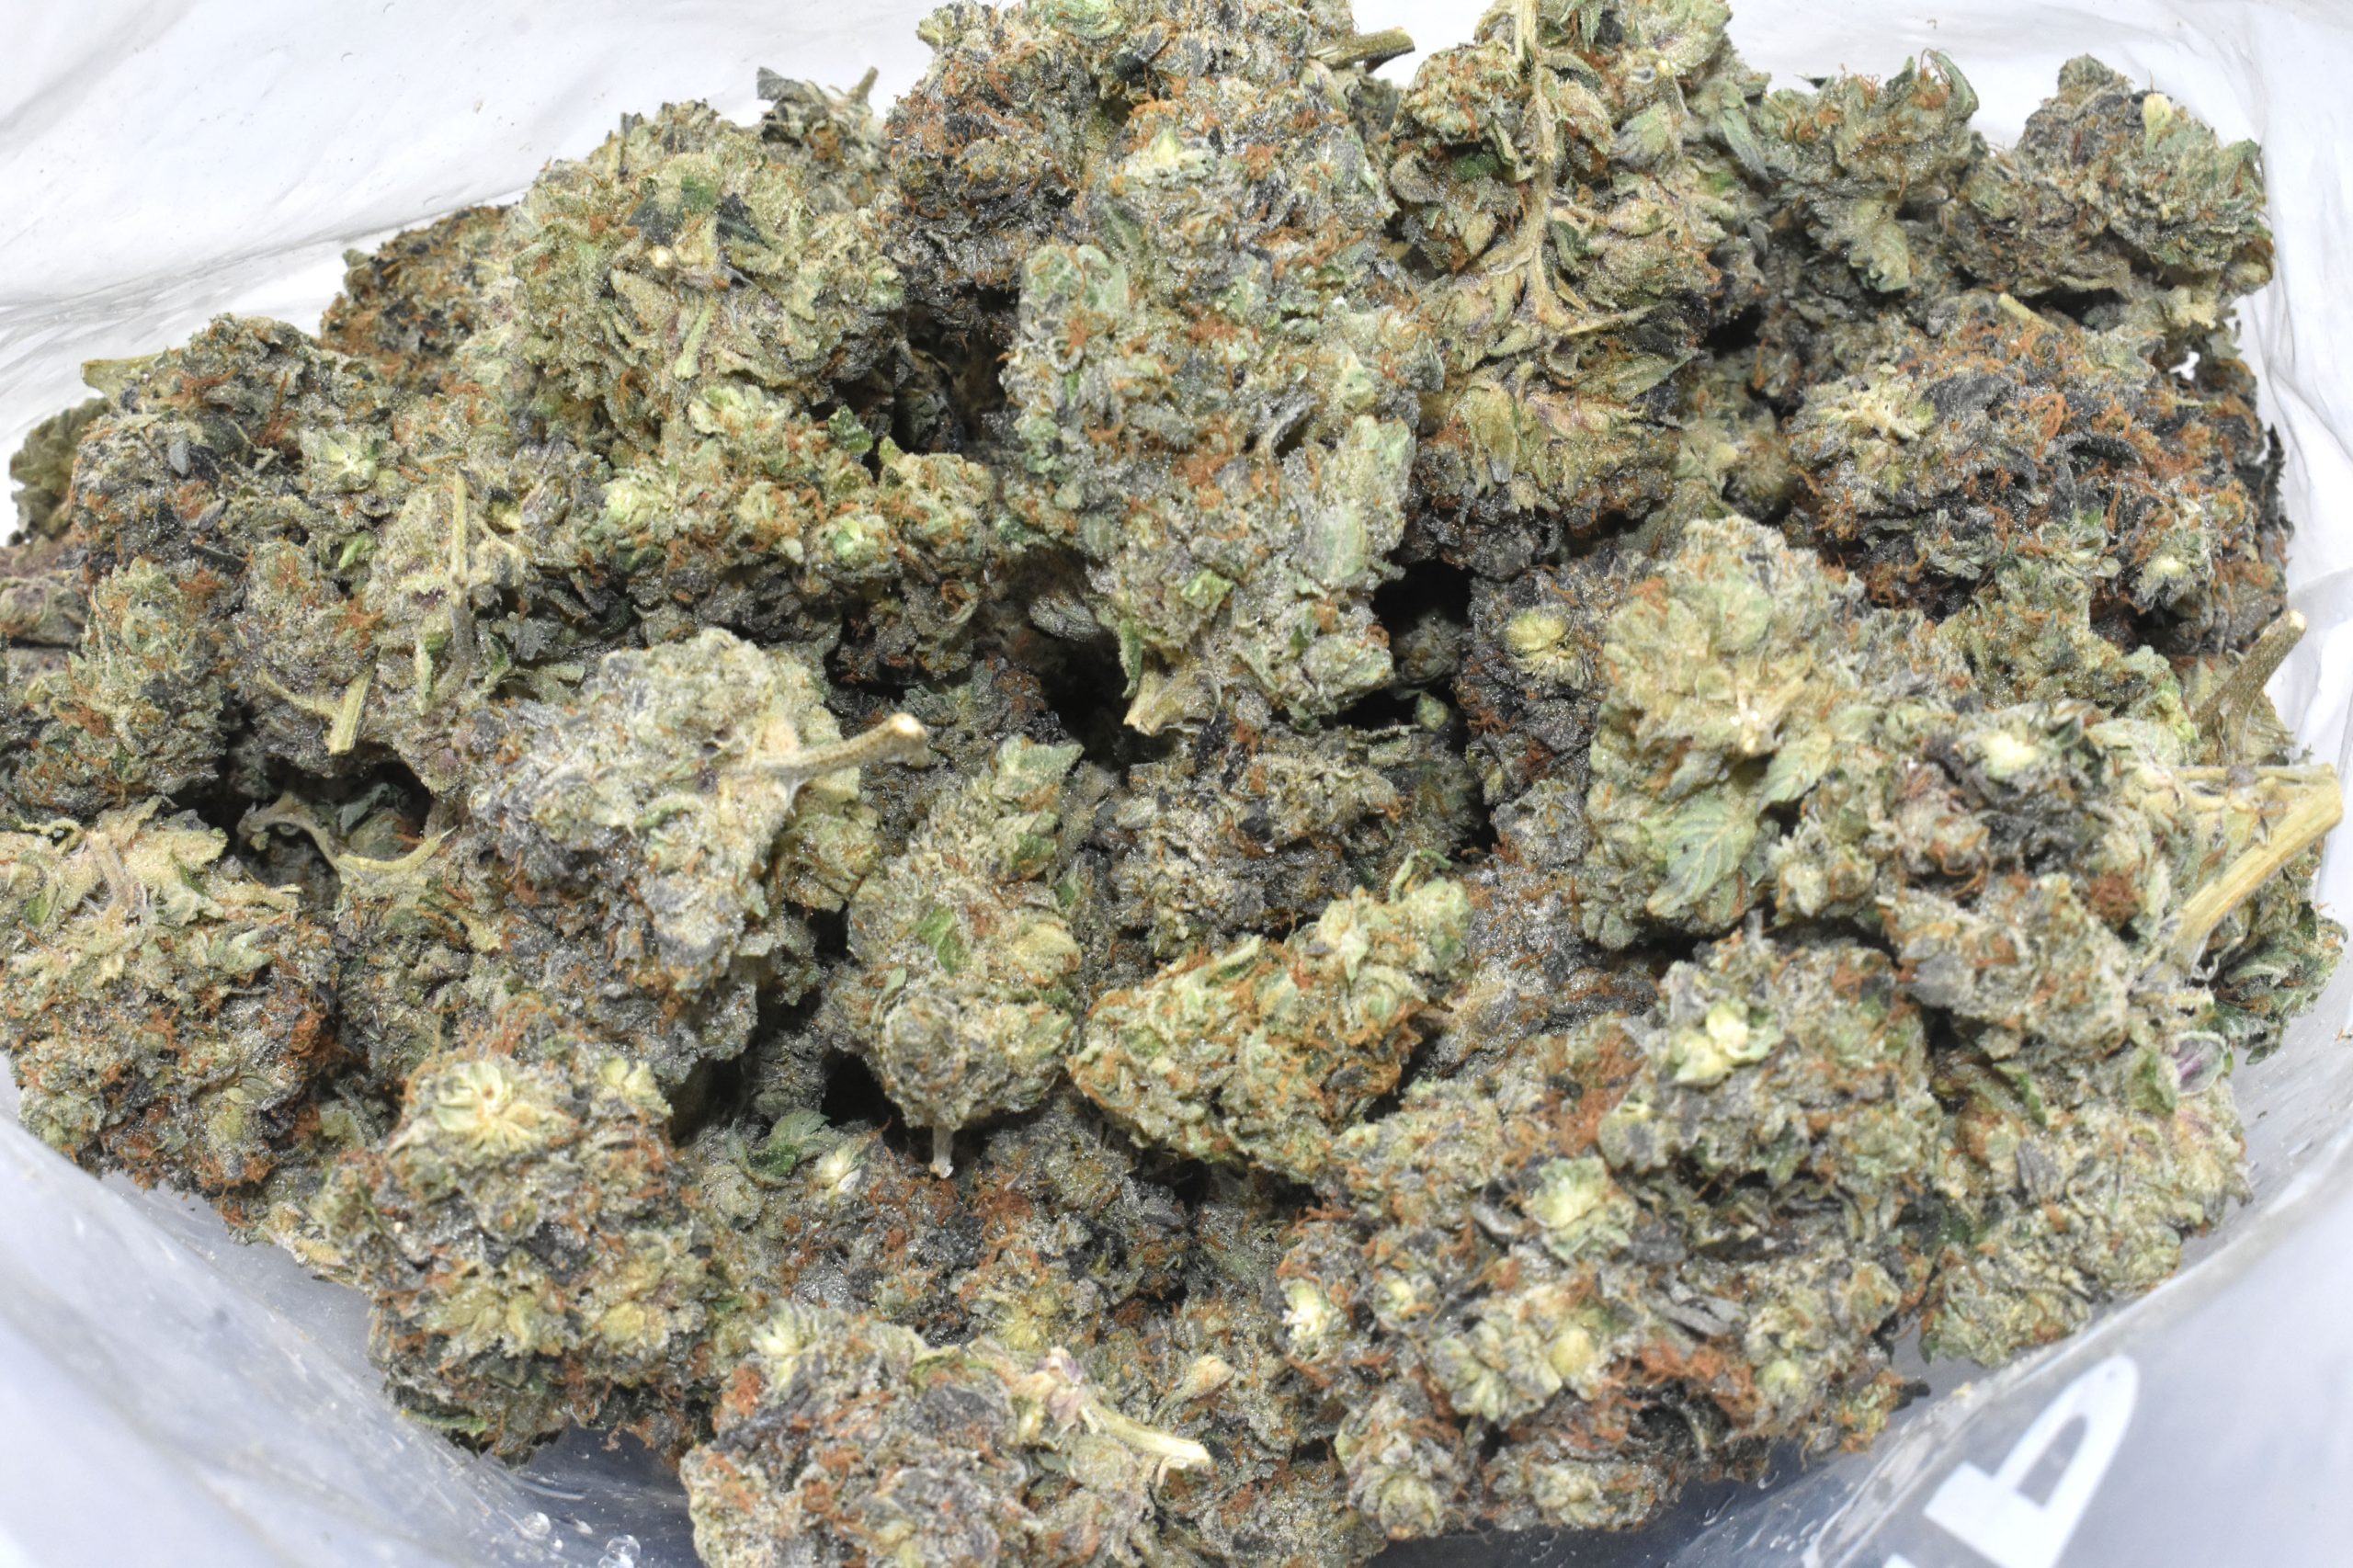 Buy-pink-gas-flower-aa-at-chronicfarms.cc-online-weed-dispensary